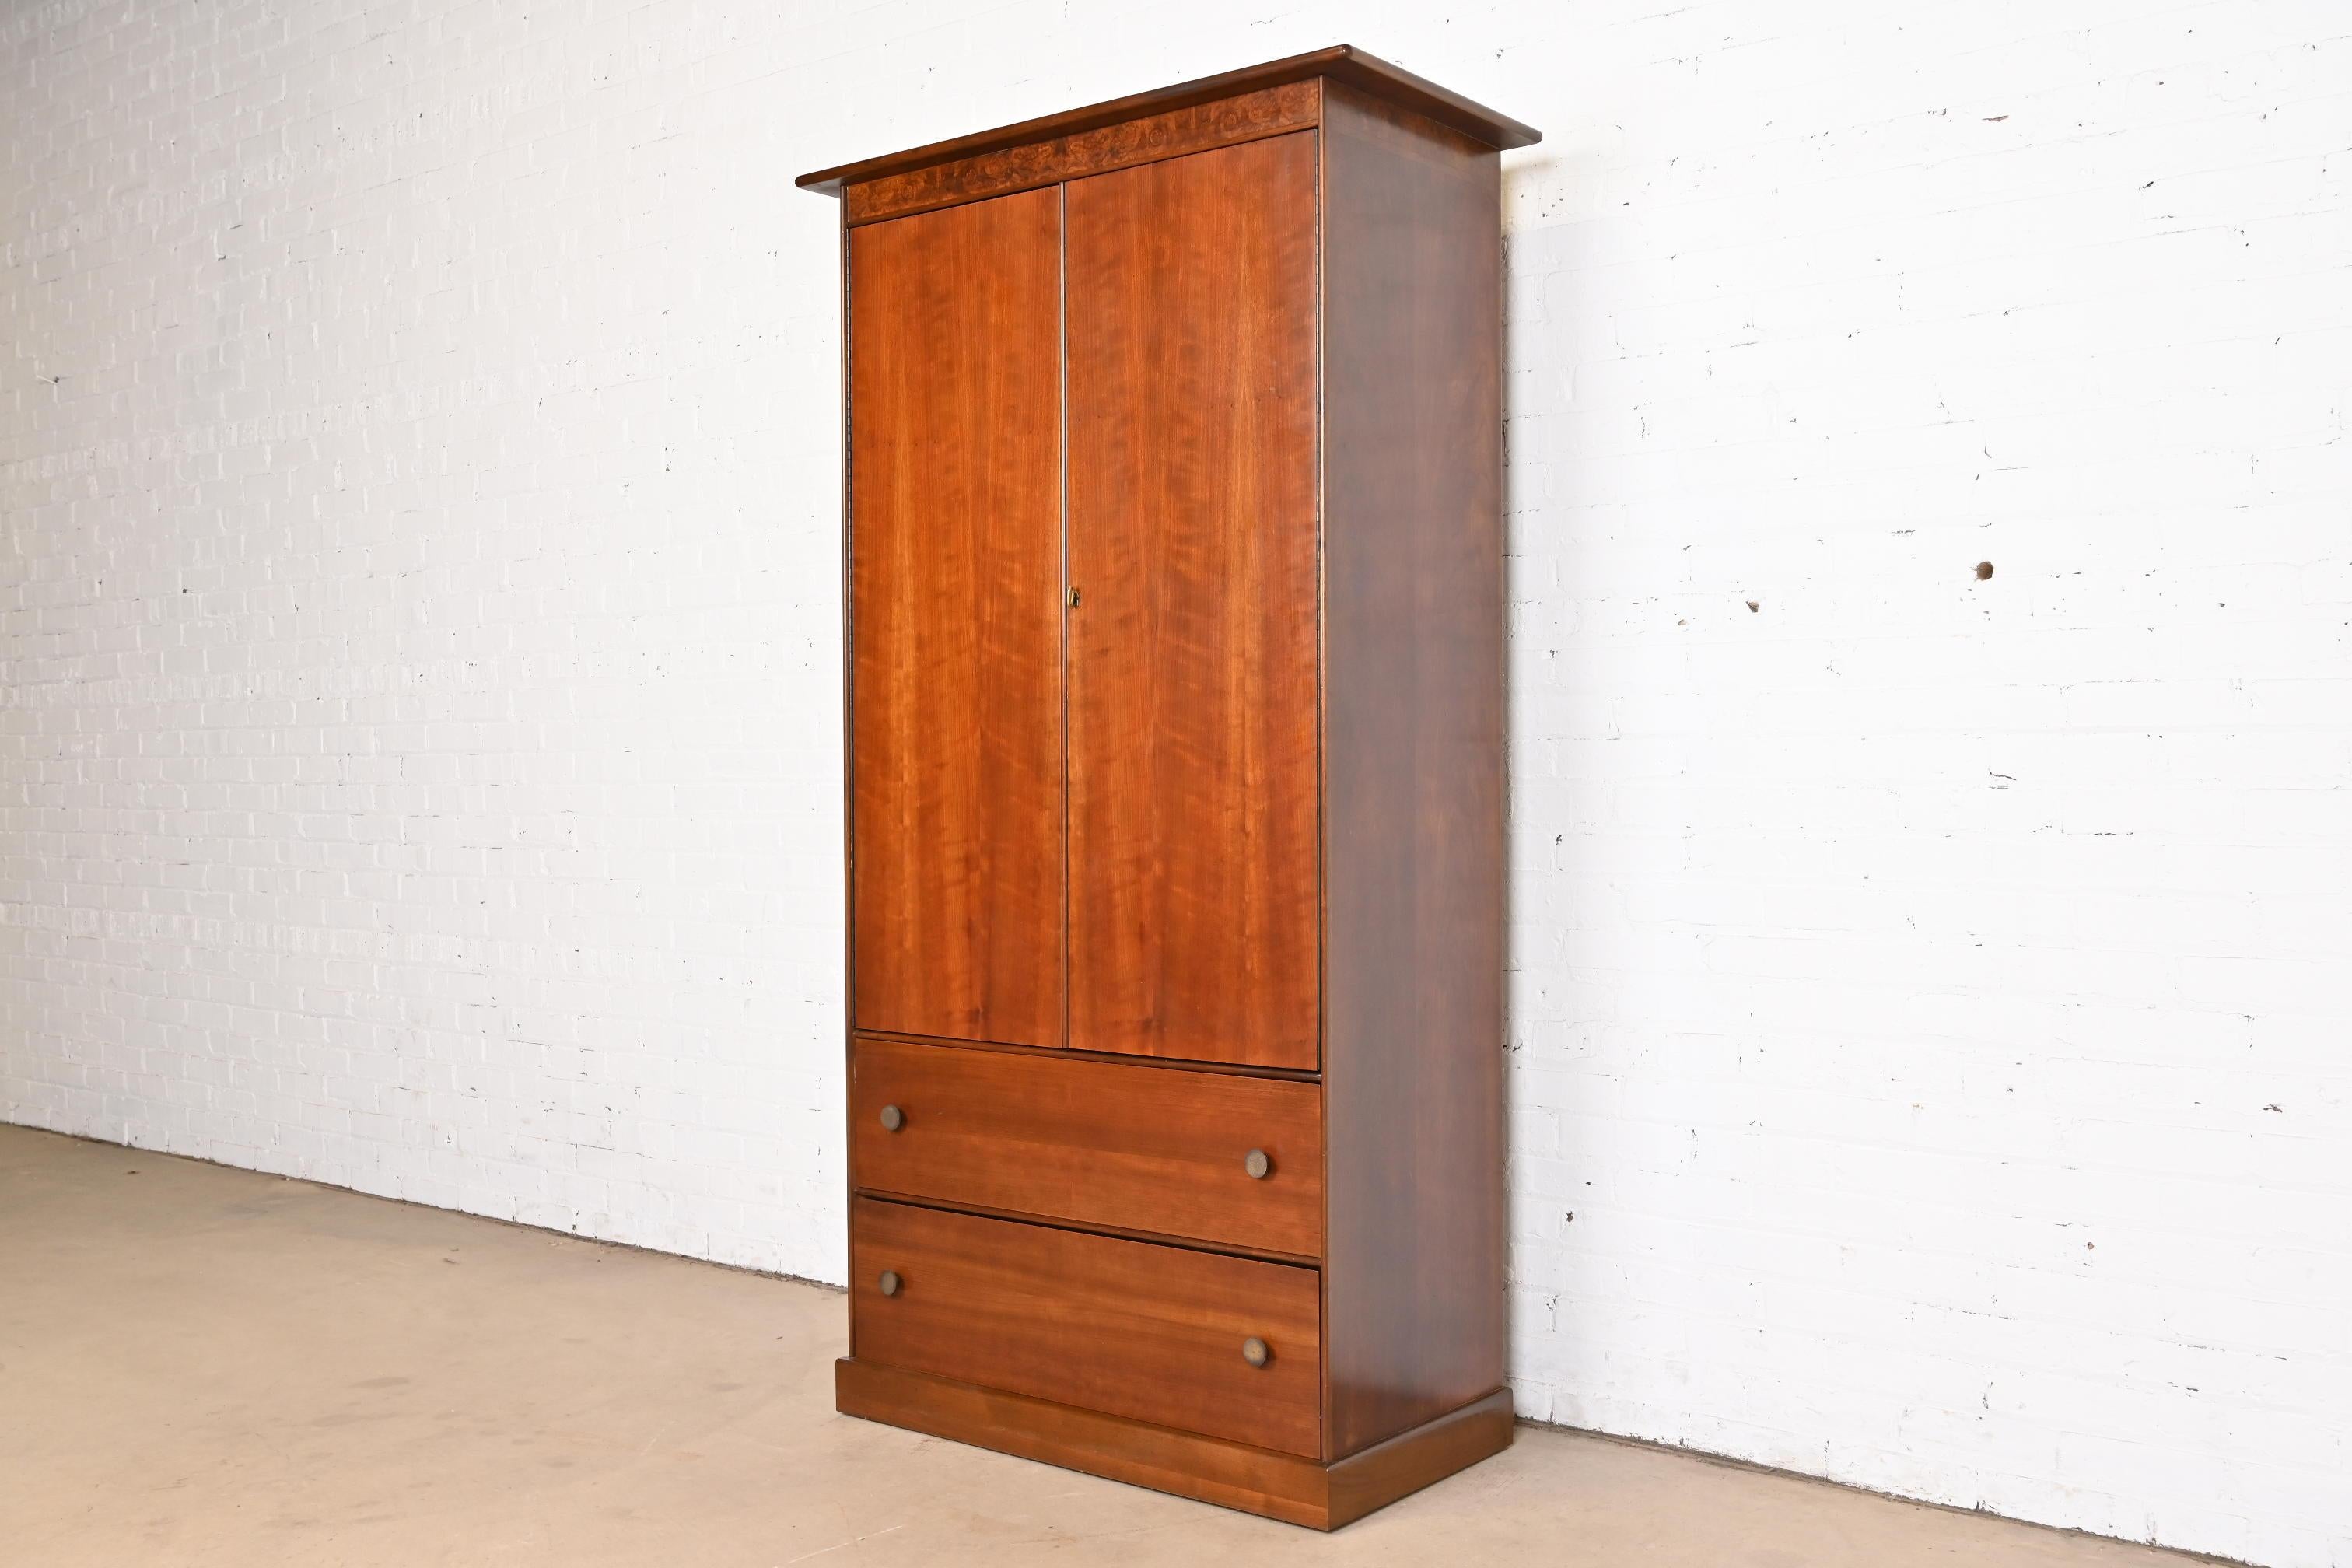 American Milo Baughman for Directional Mid-Century Modern Armoire Dresser, 1960s For Sale